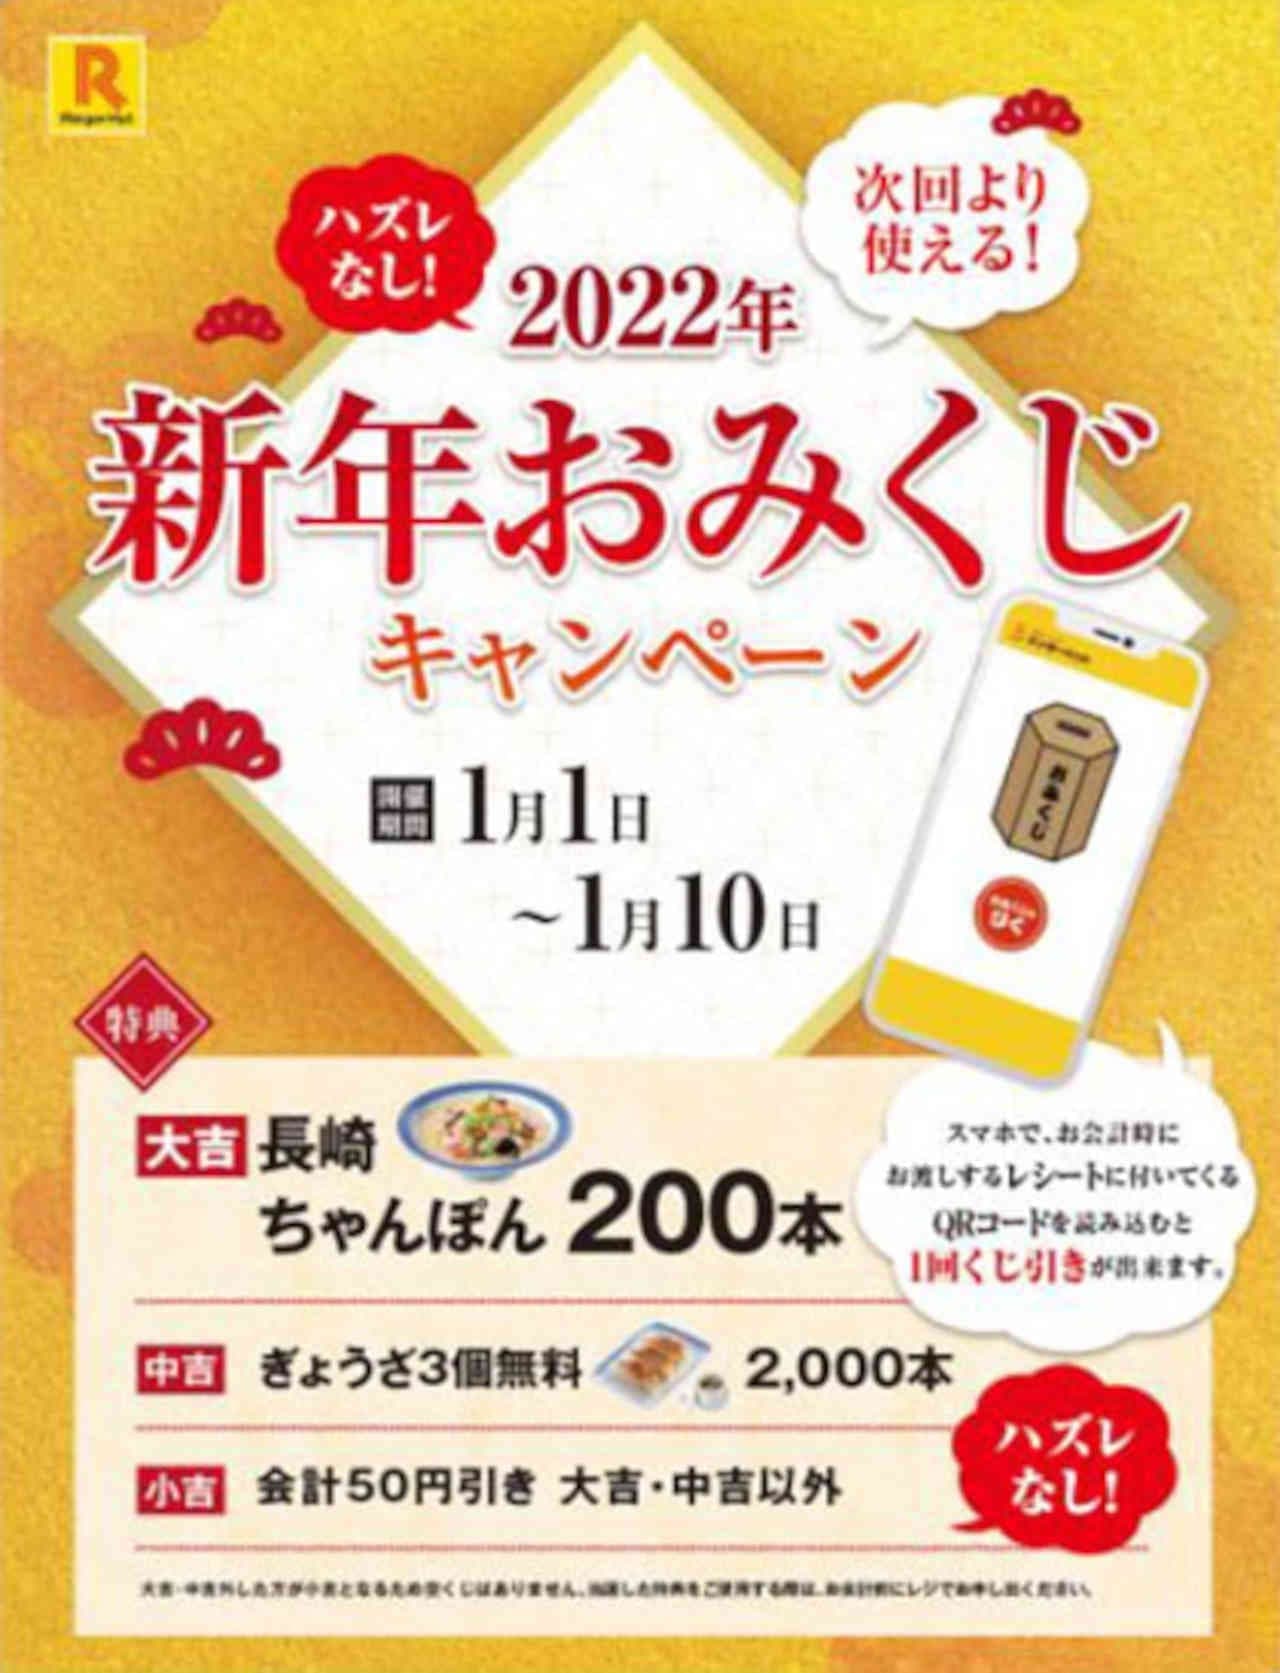 Ringer Hut "Nagasaki Champon Voucher" etc. "Year-end Garapon Campaign" and "New Year Omikuji Campaign"